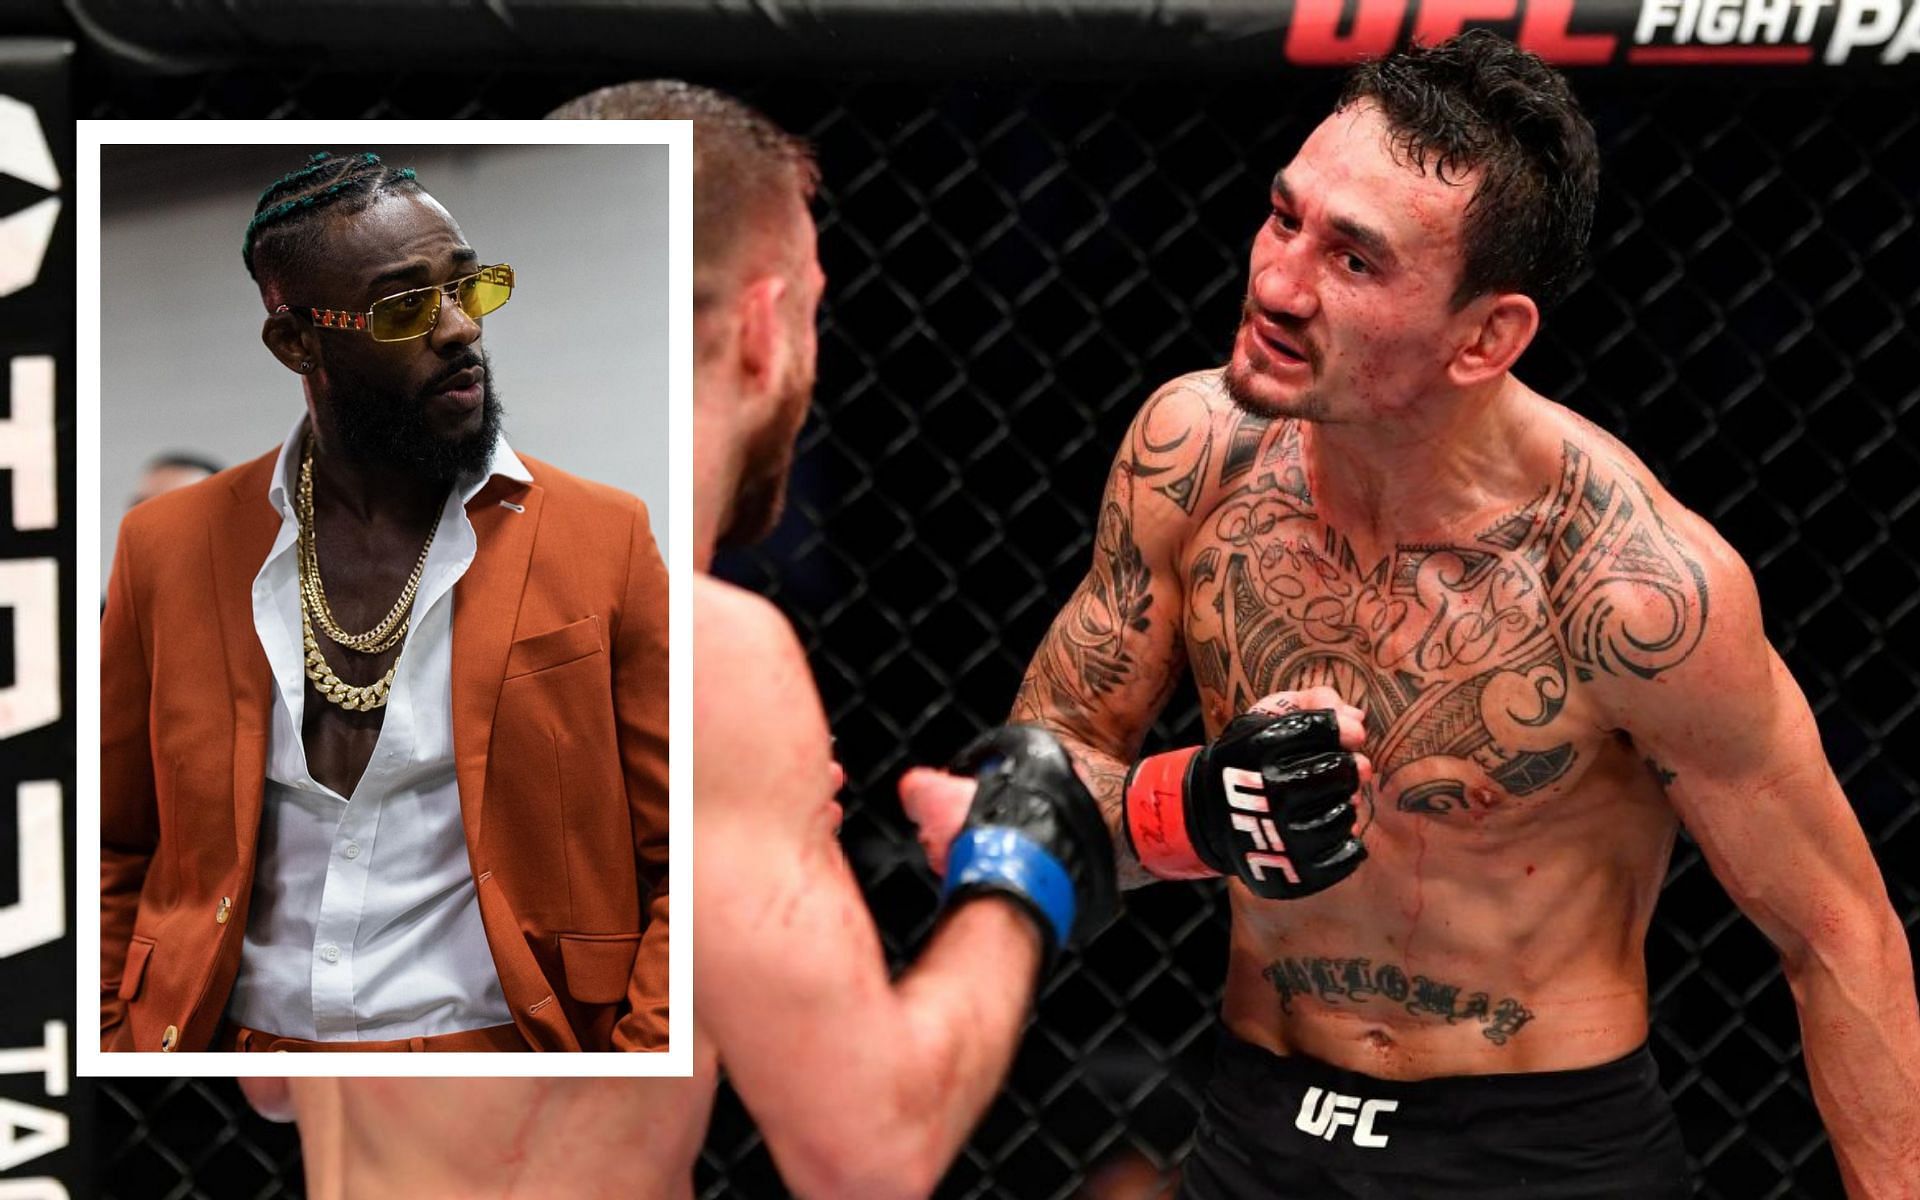 Aljamain Sterling (left) claims to want to mimic Max Holloway